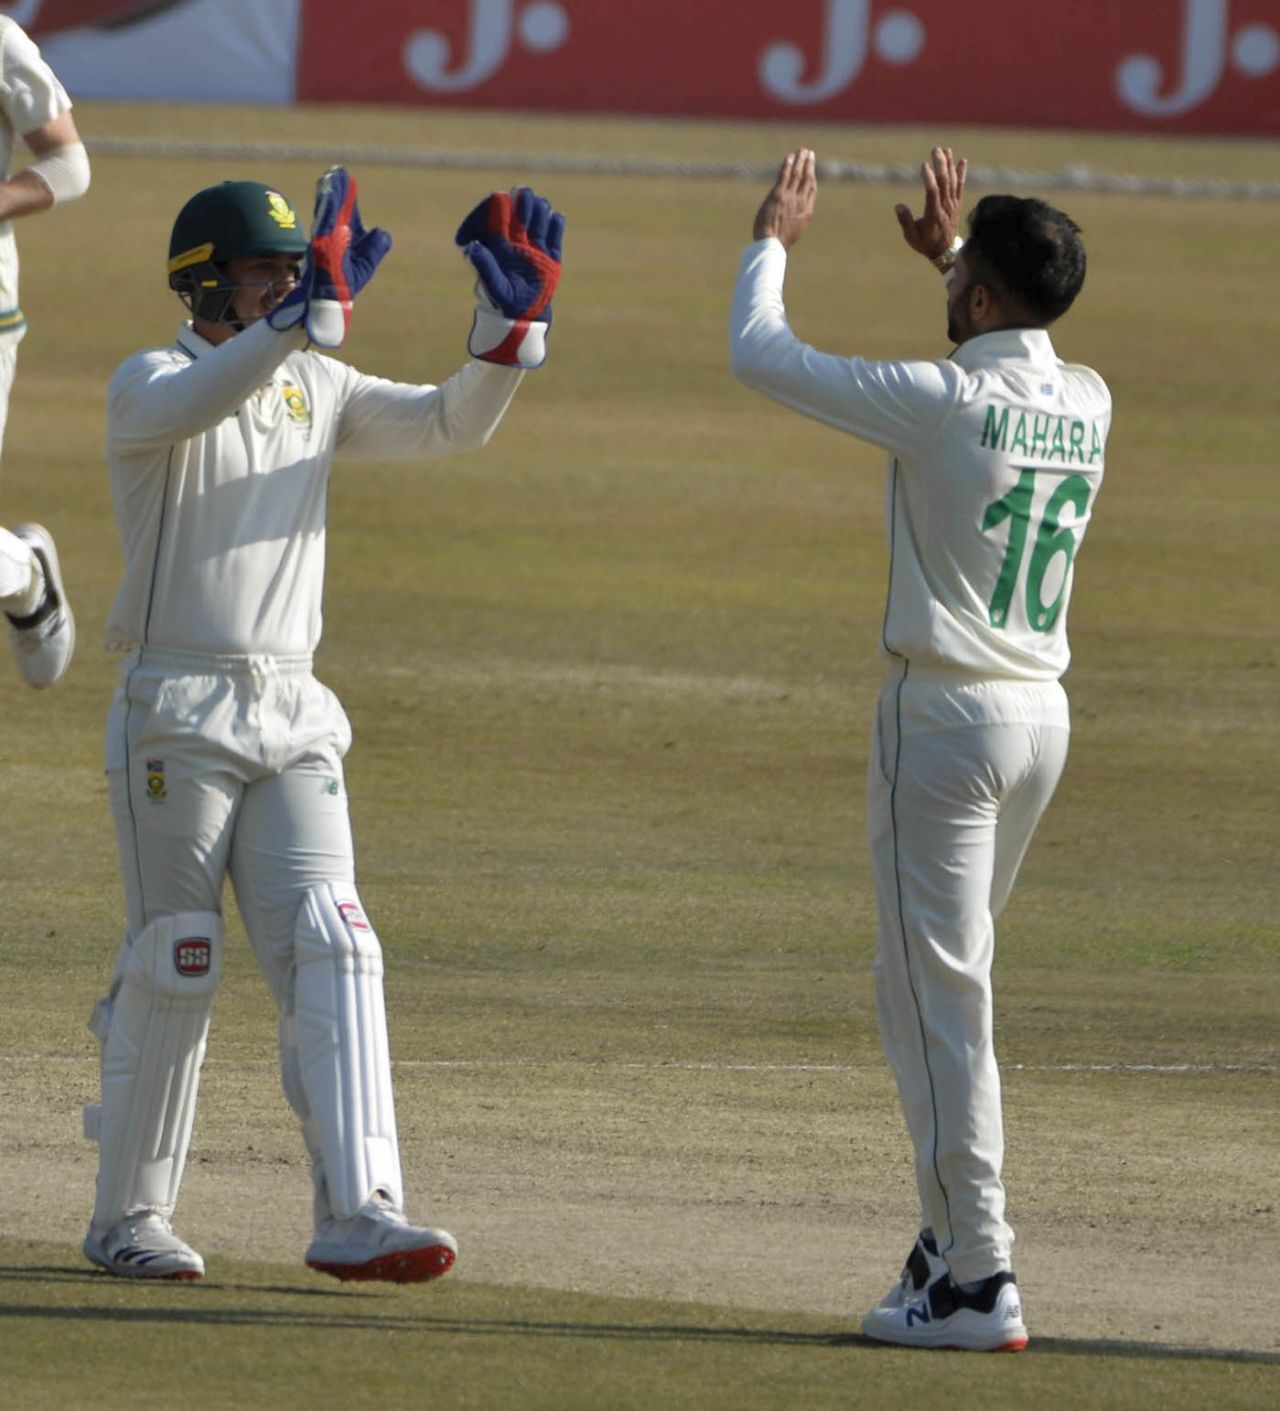 Keshav Maharaj celebrates with Quinton de Kock after striking early in the day, Pakistan vs South Africa, 2nd Test, Rawalpindi, 4th day, February 7, 2021